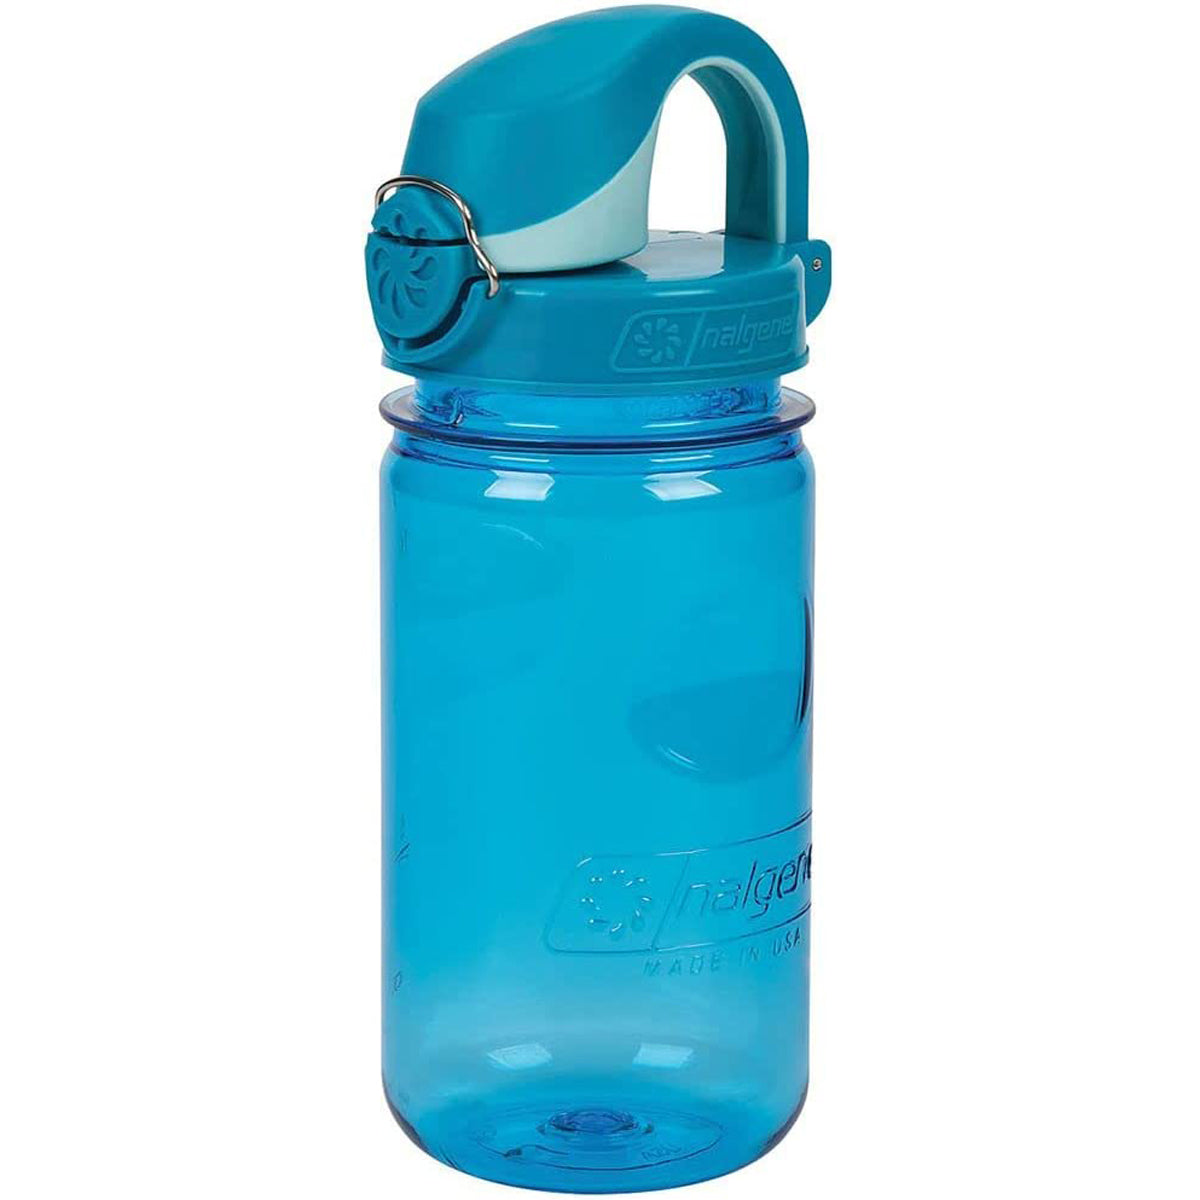  Nalgene Sustain Tritan BPA-Free Kids On The Fly Water Bottle  Made with Material Derived from 50% Plastic Waste, Leak Proof, Durable, BPA  Free, Carabiner Friendly, Reusable, 12 oz, BeYouTiful 